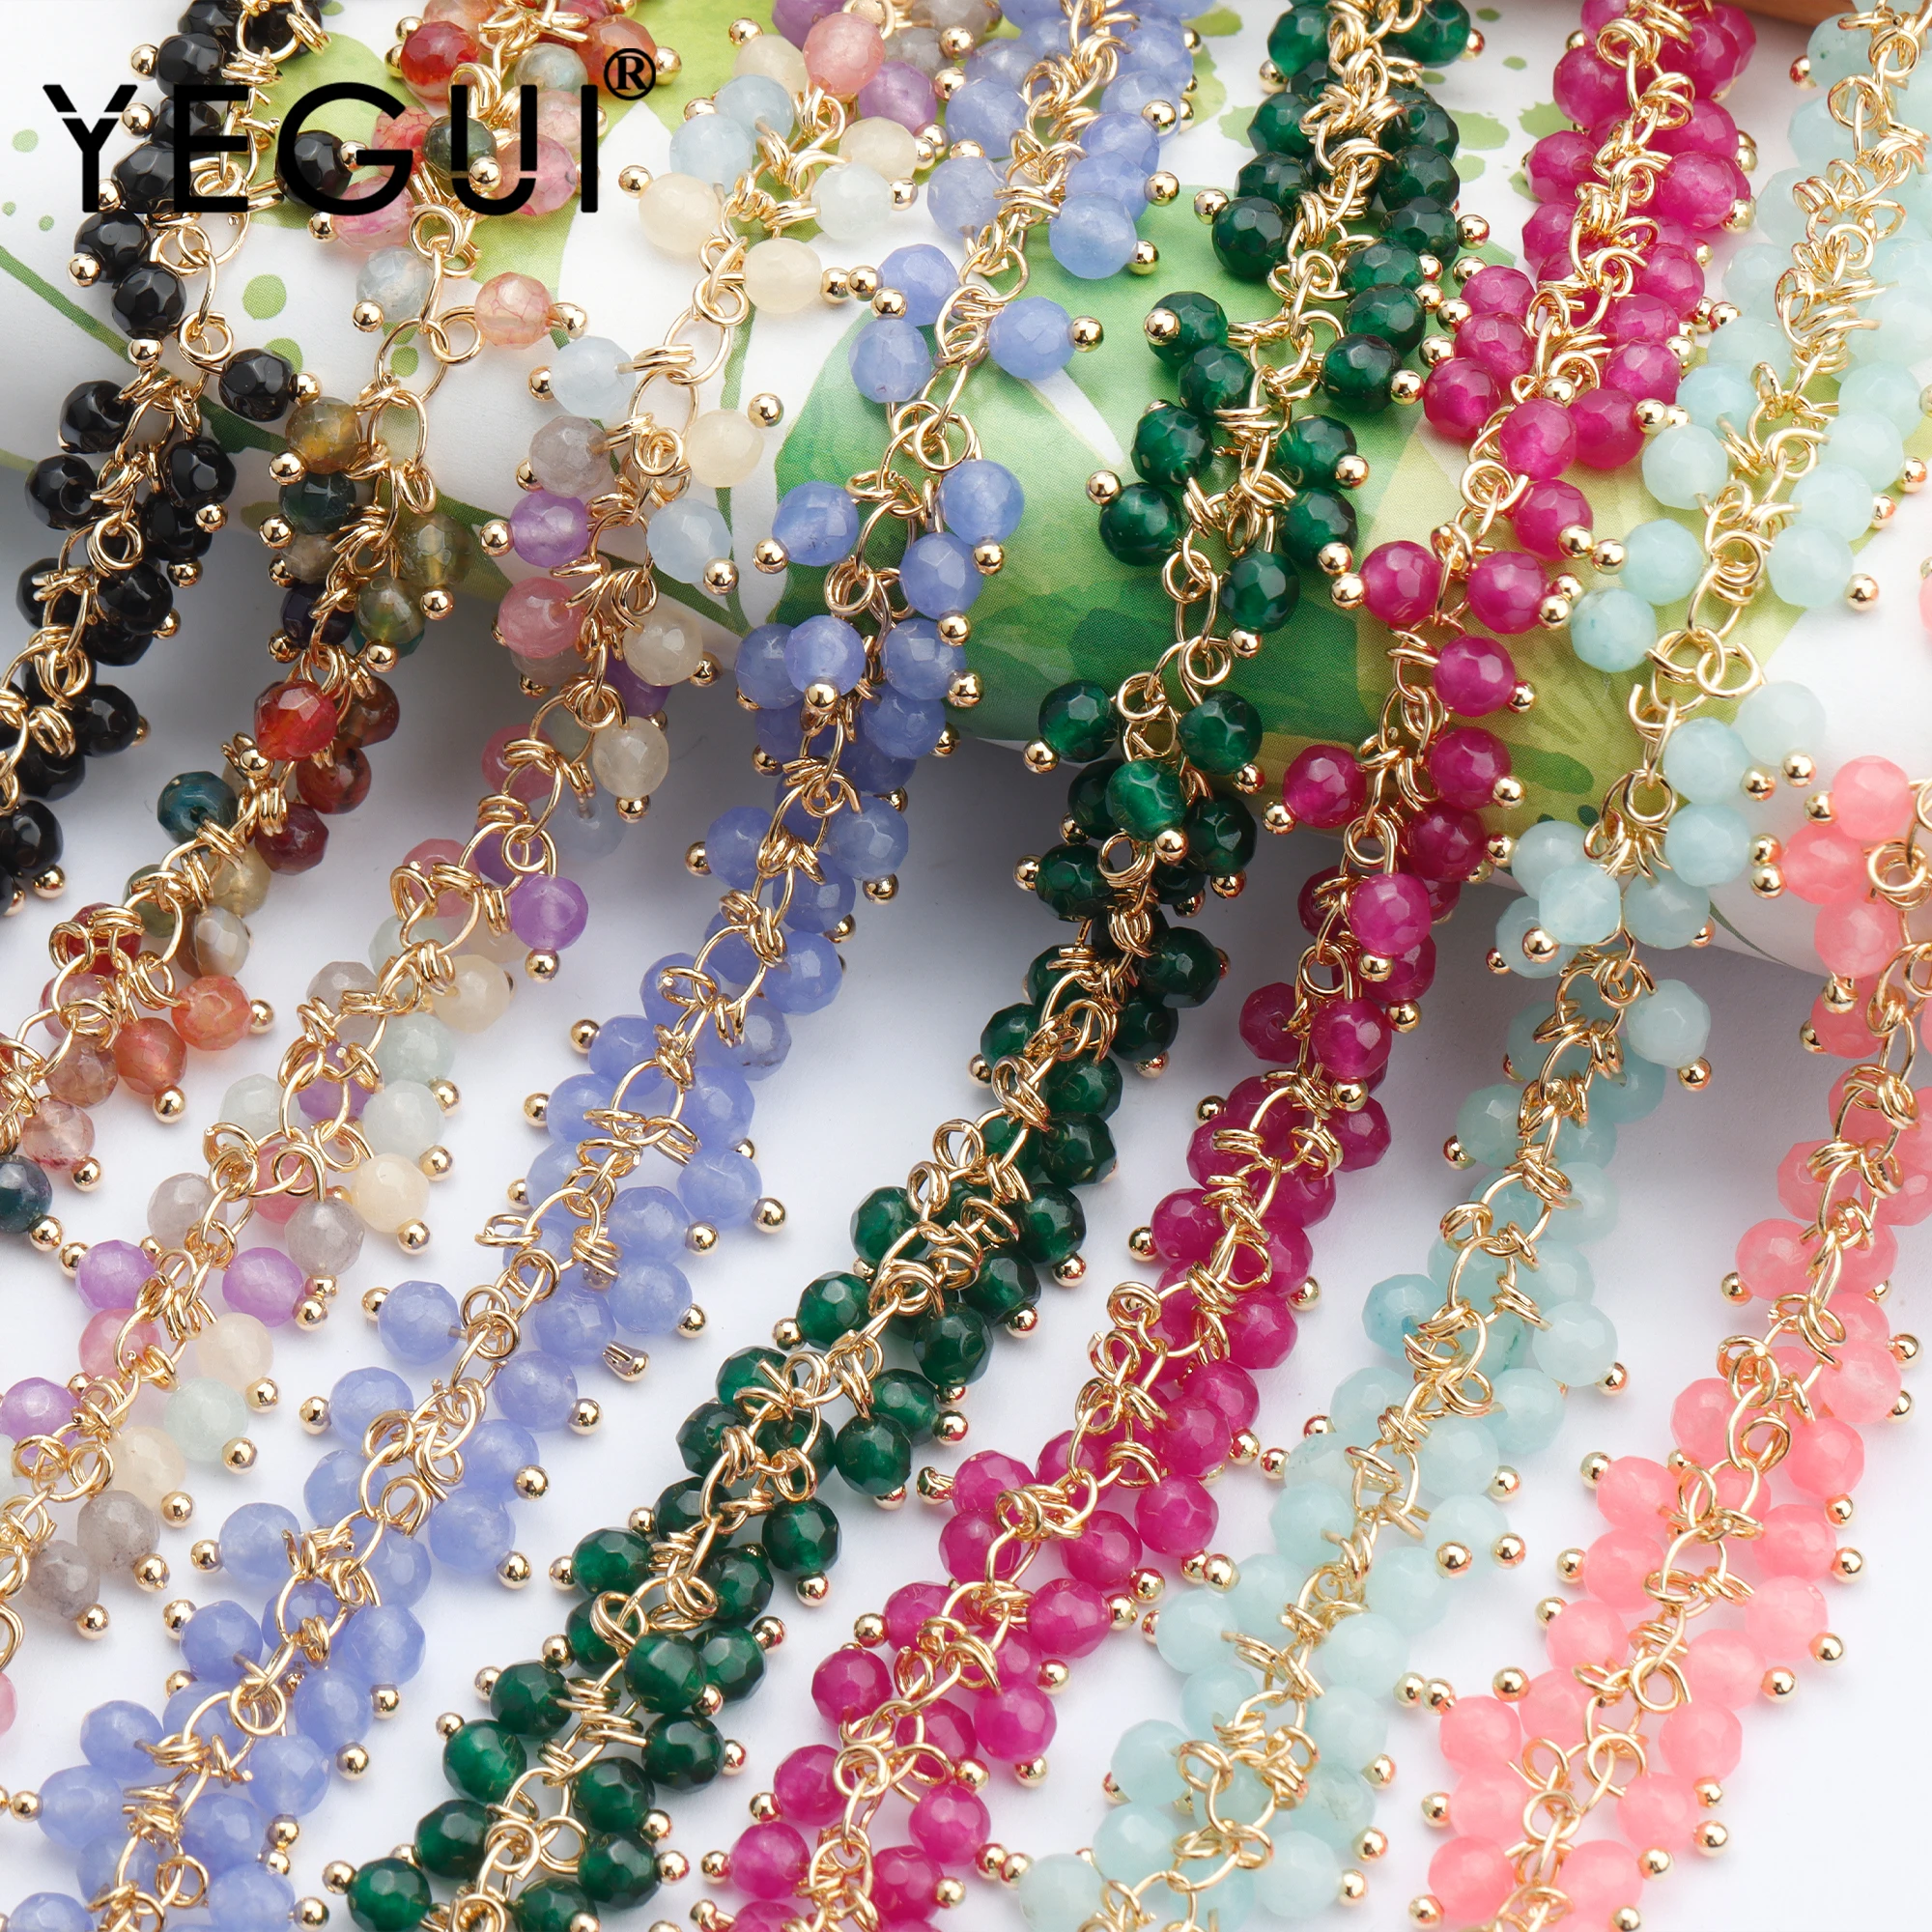 

YEGUI C148,jewelry accessories,diy chain,18k gold plated,0.3 microns,hand made,diy bracelet necklace,jewelry making,50cm/lot